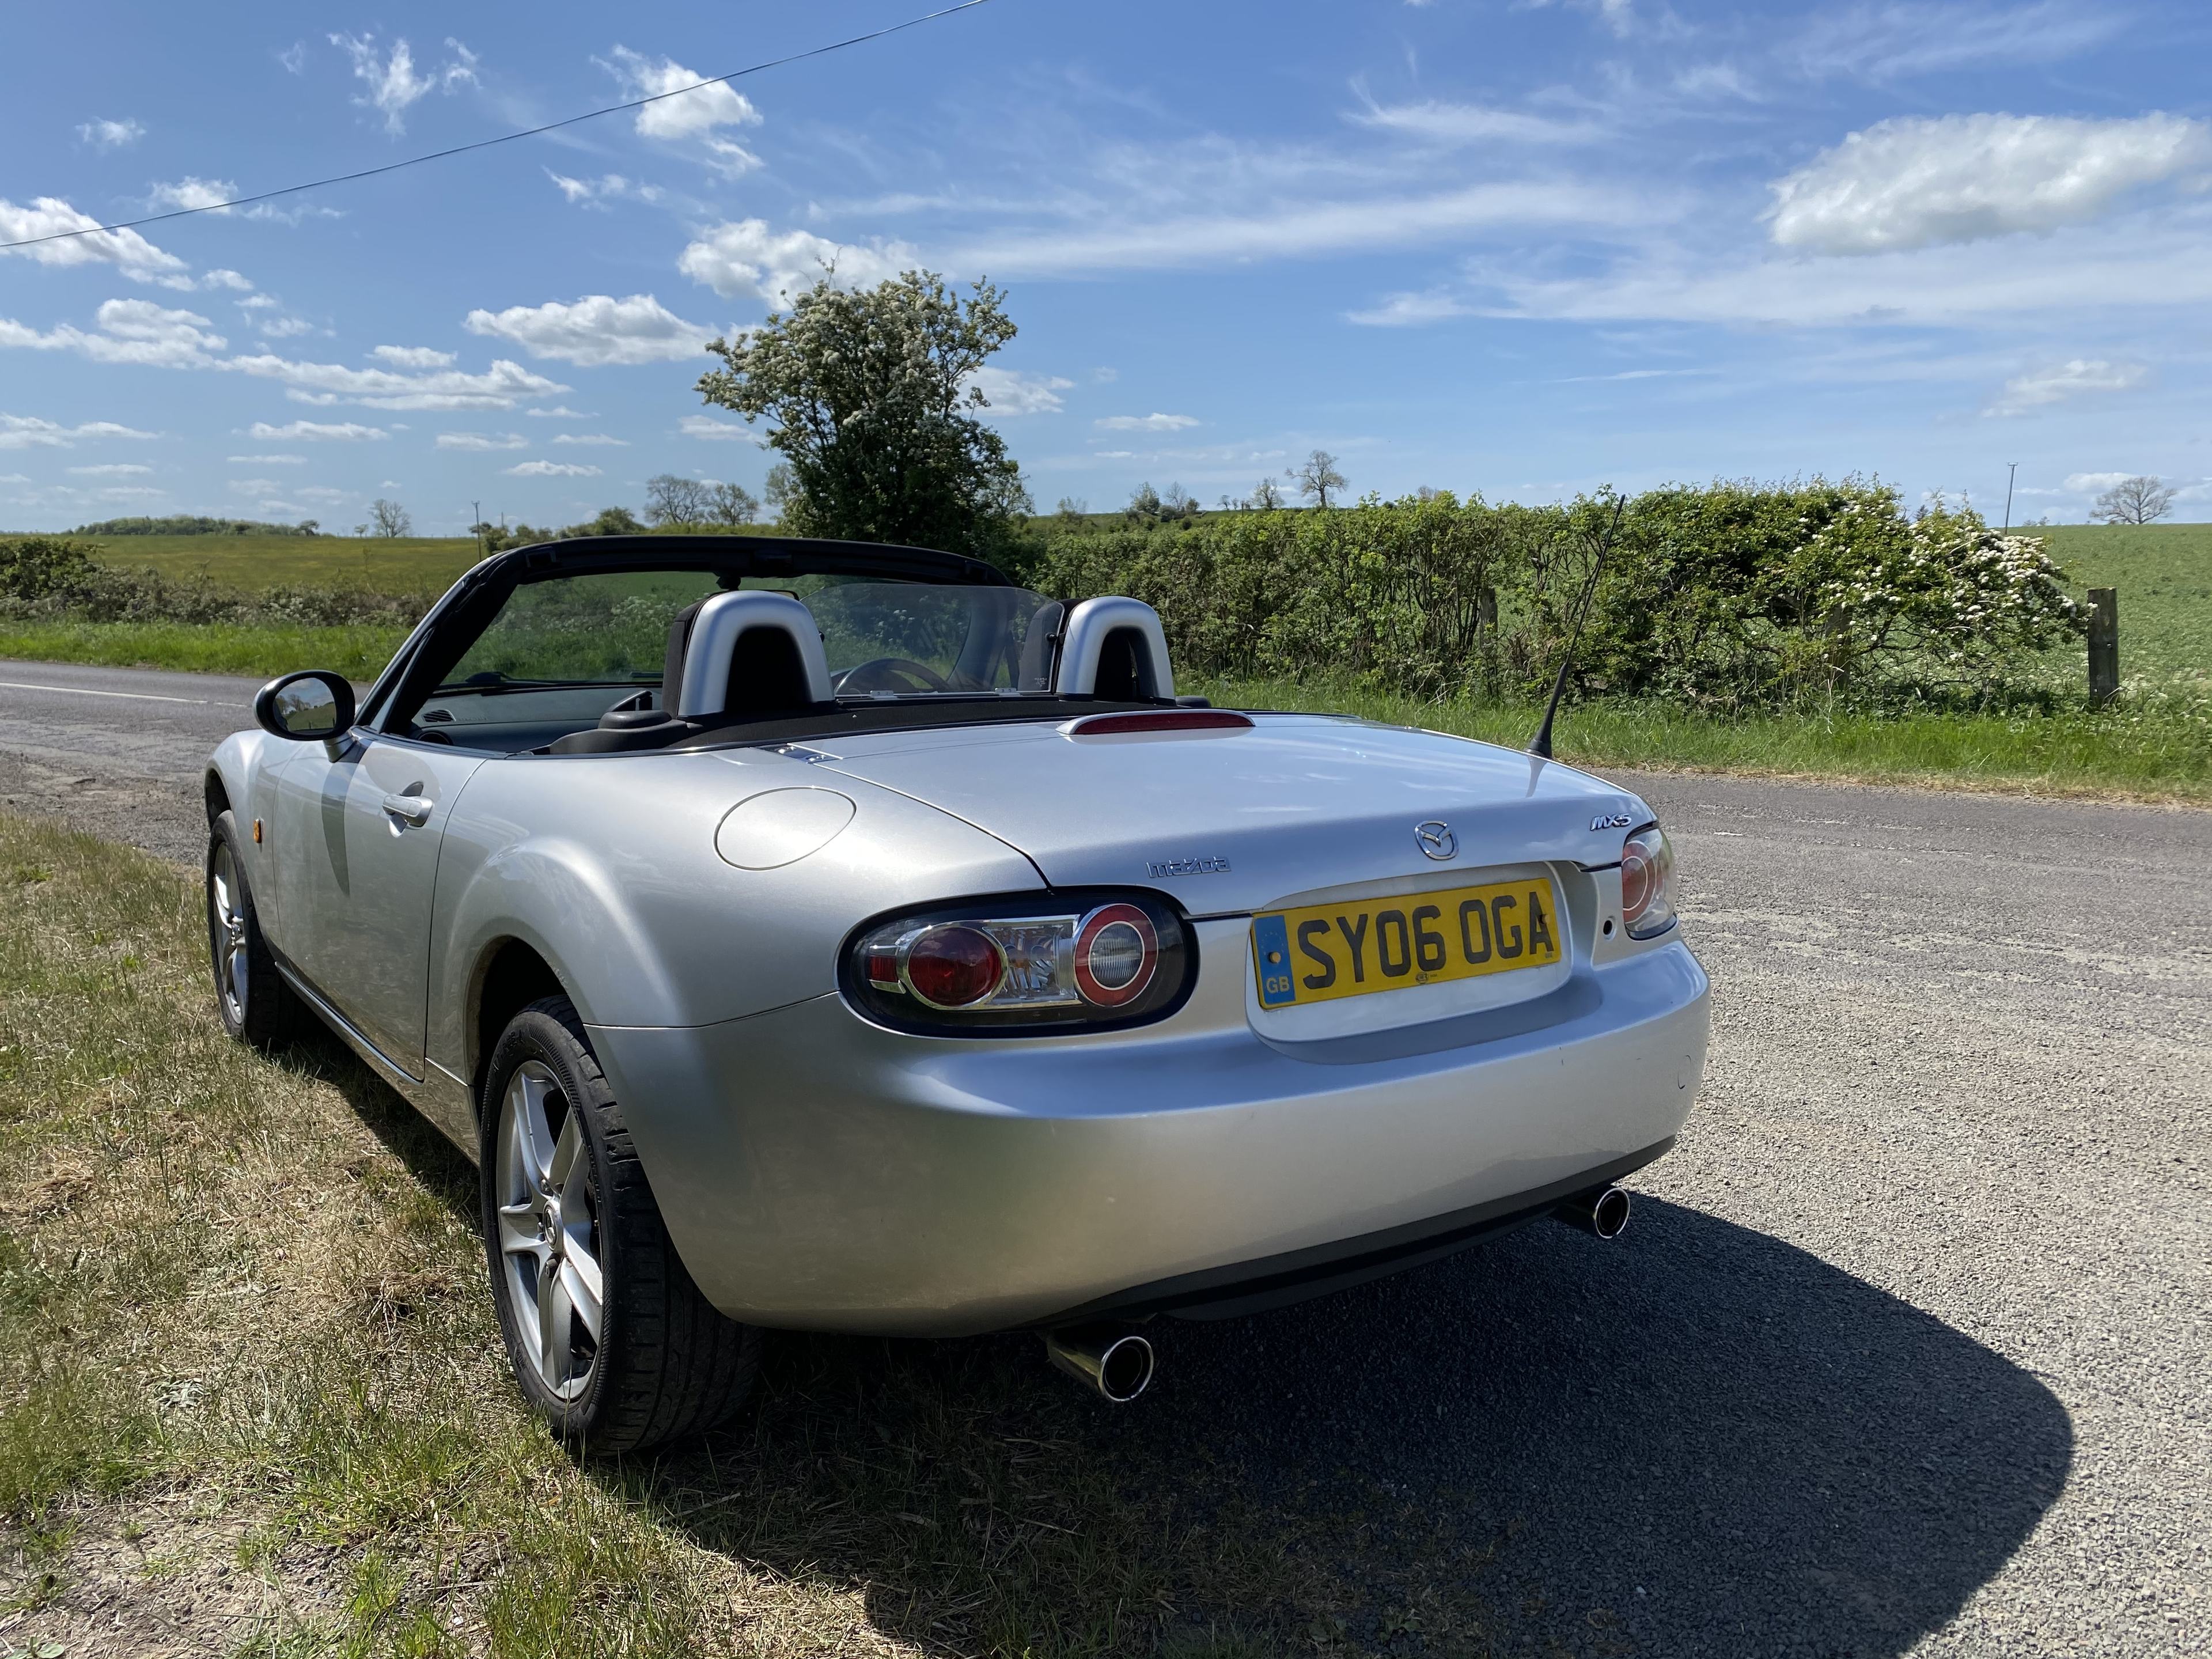 Lockdown Purchase - NC MX-5 Sport - Page 1 - Readers' Cars - PistonHeads